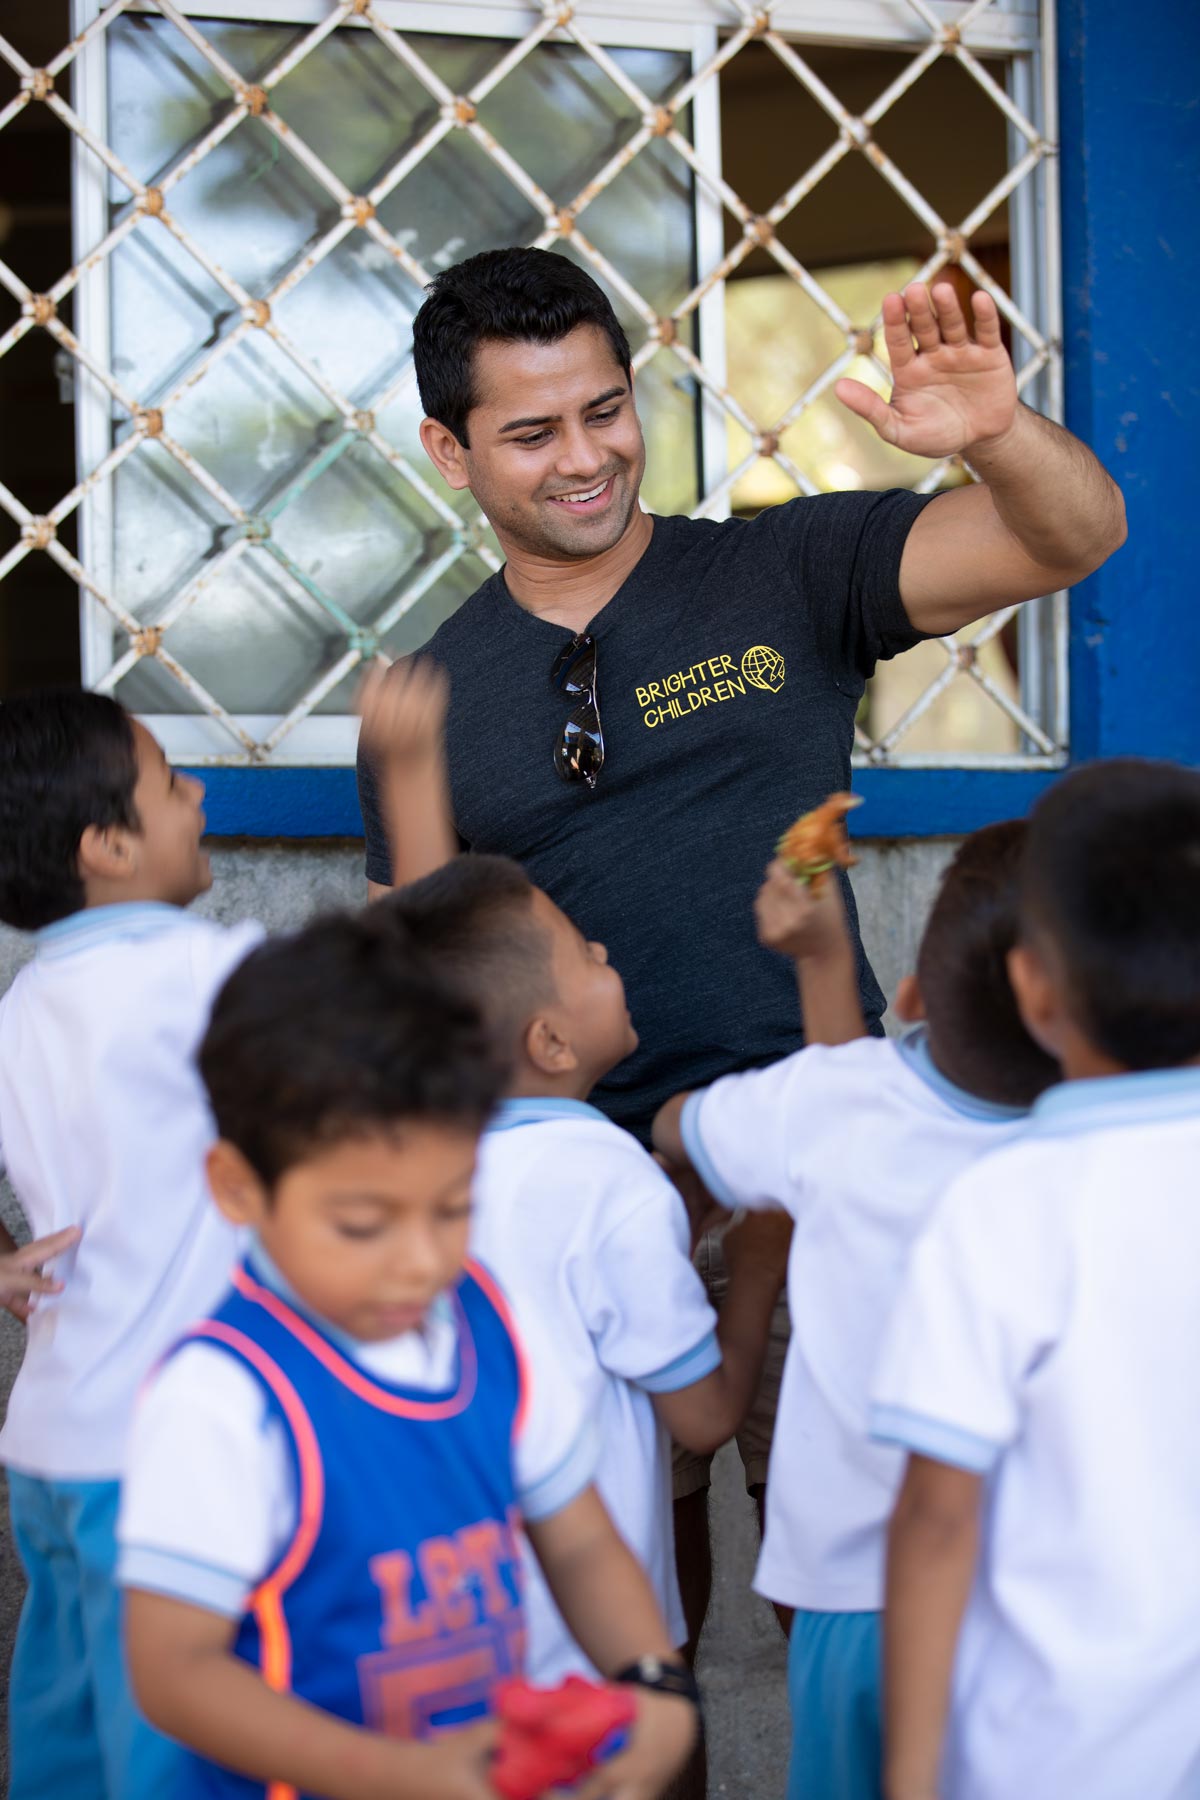 Kunal Doshi leading the children in an activity